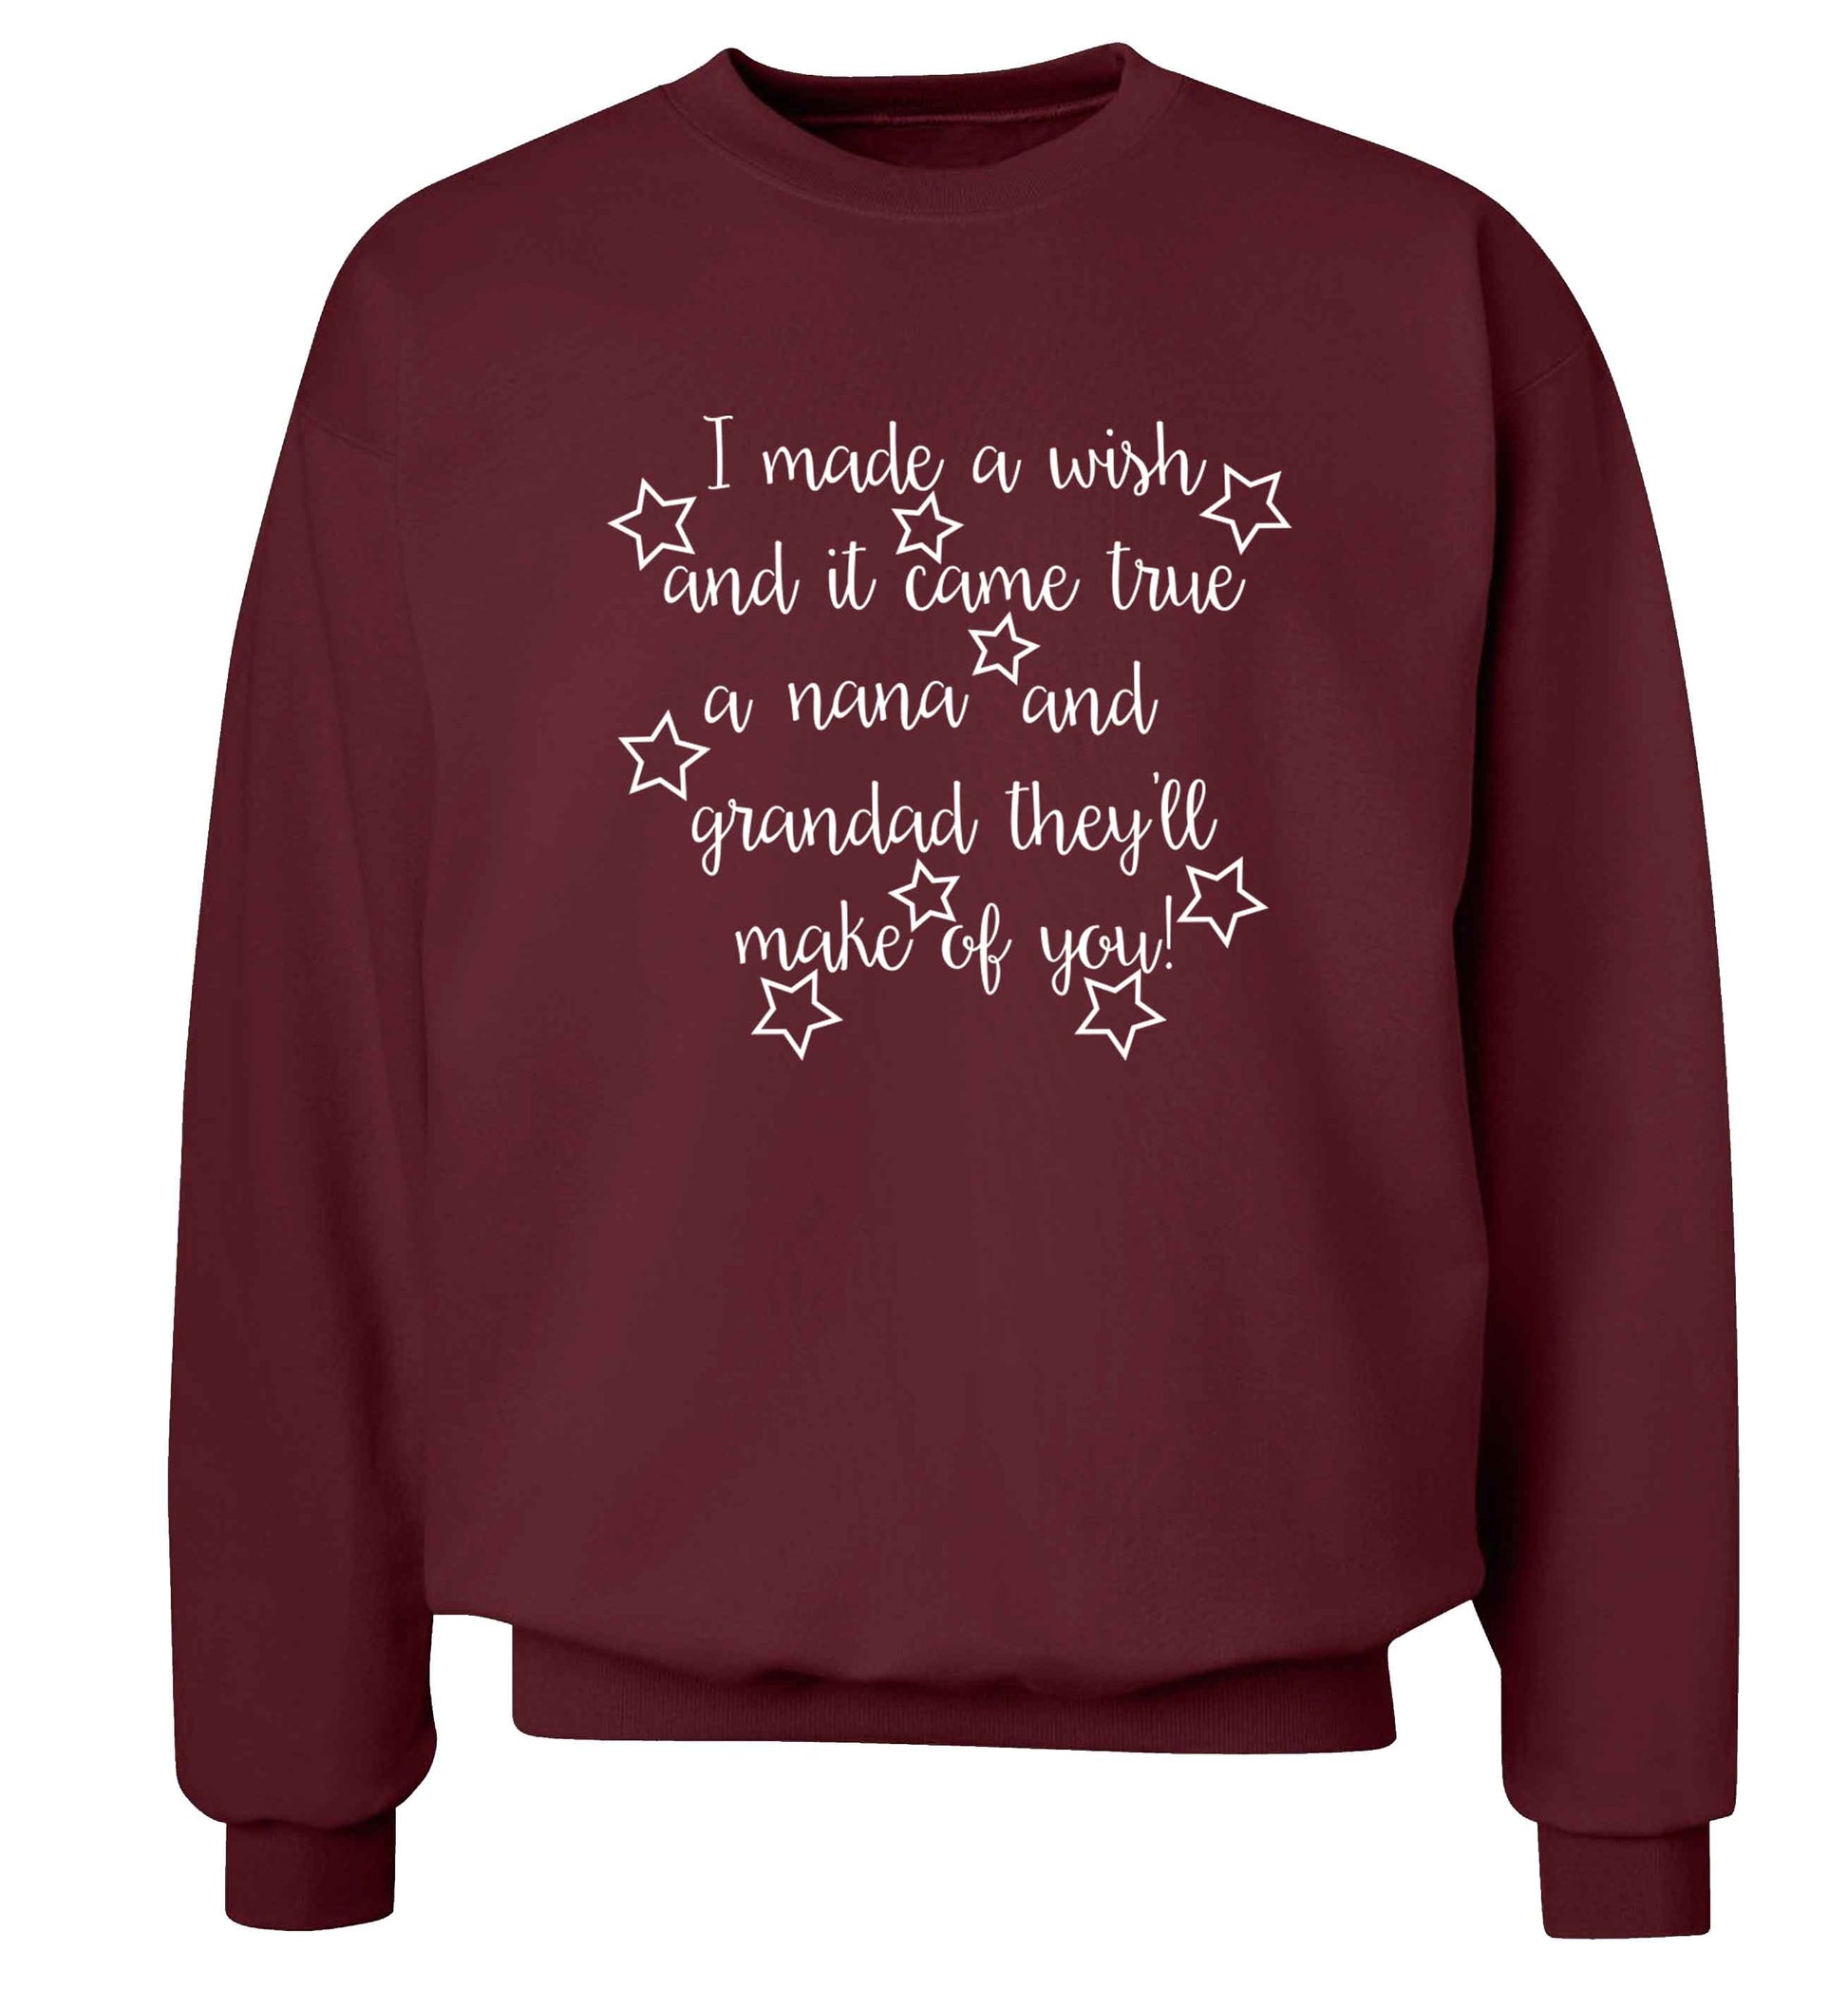 I made a wish and it came true a nana and grandad they'll make of you! Adult's unisex maroon Sweater 2XL